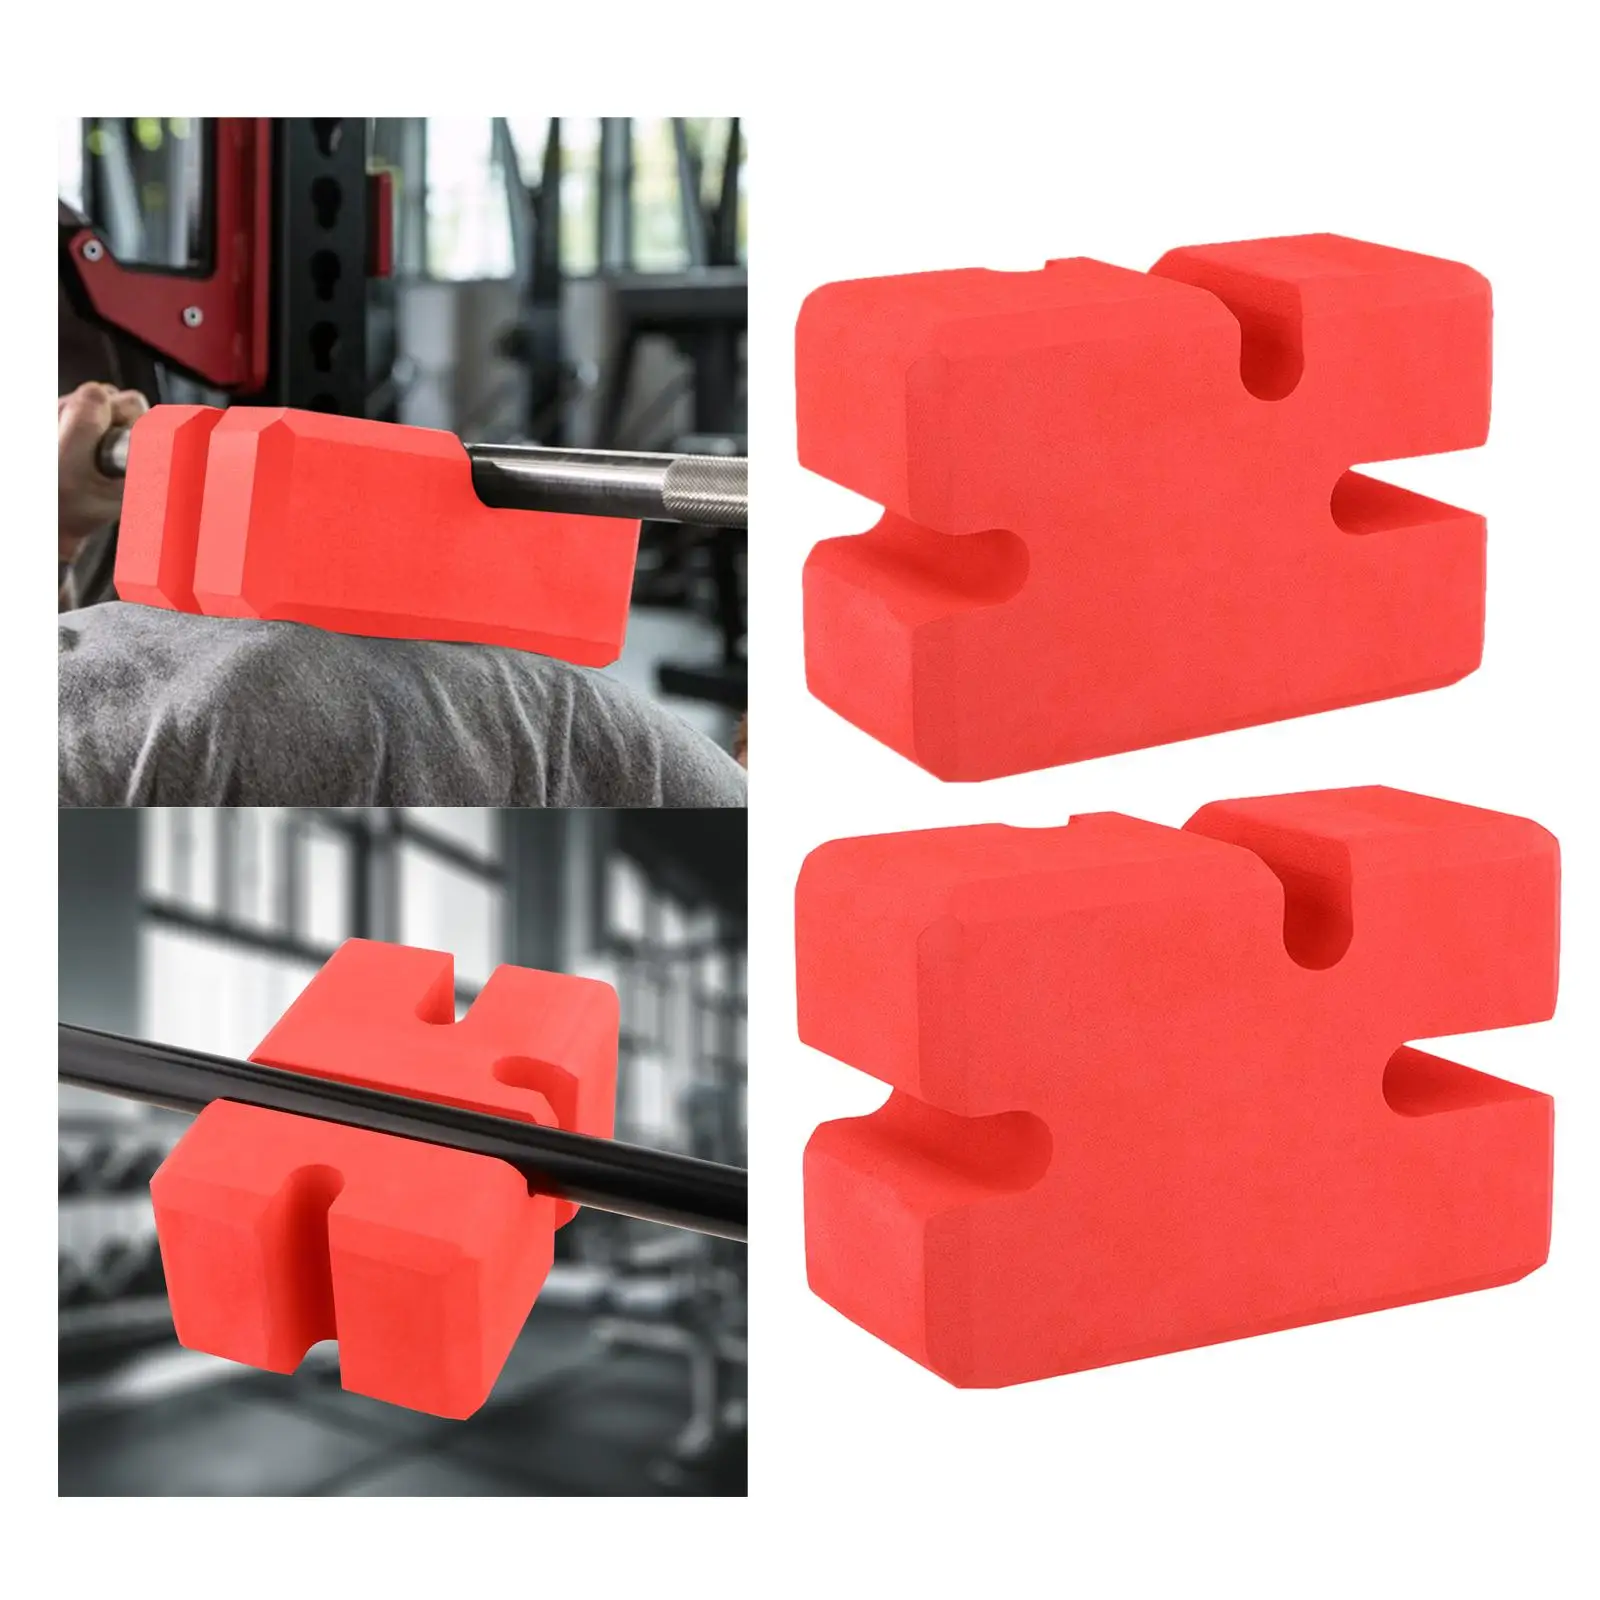 EVA Bench Press Block Gym Board Anti-Slip with Cut Grooves Weight Lifting Workout Home Portable Fitness Trainer Bench Blocks